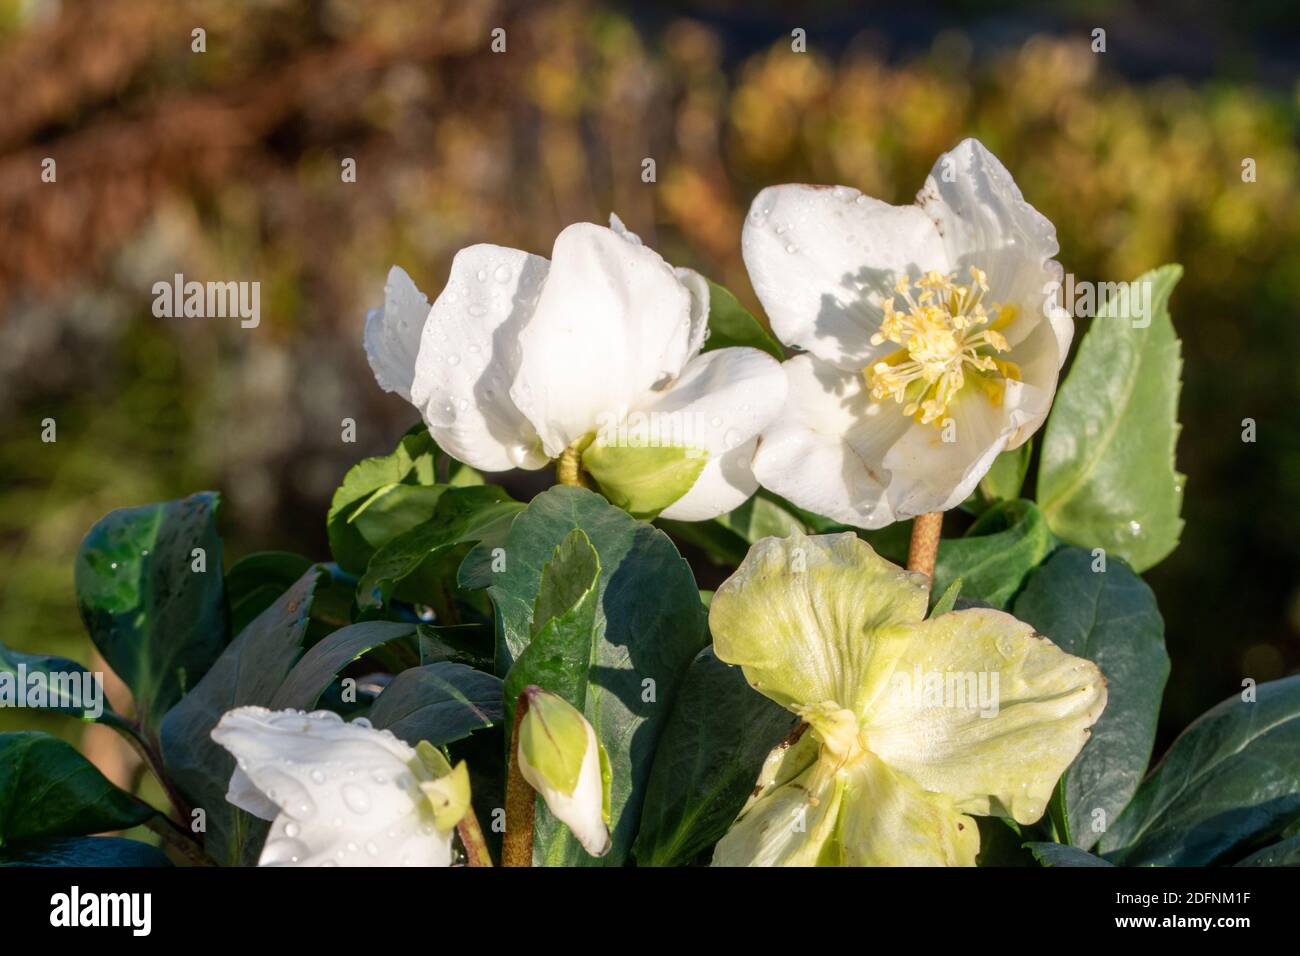 The Christmas rose, Helleborus niger is also called snow rose or hellebore and inspires in winter with its elegant white flowers. Stock Photo